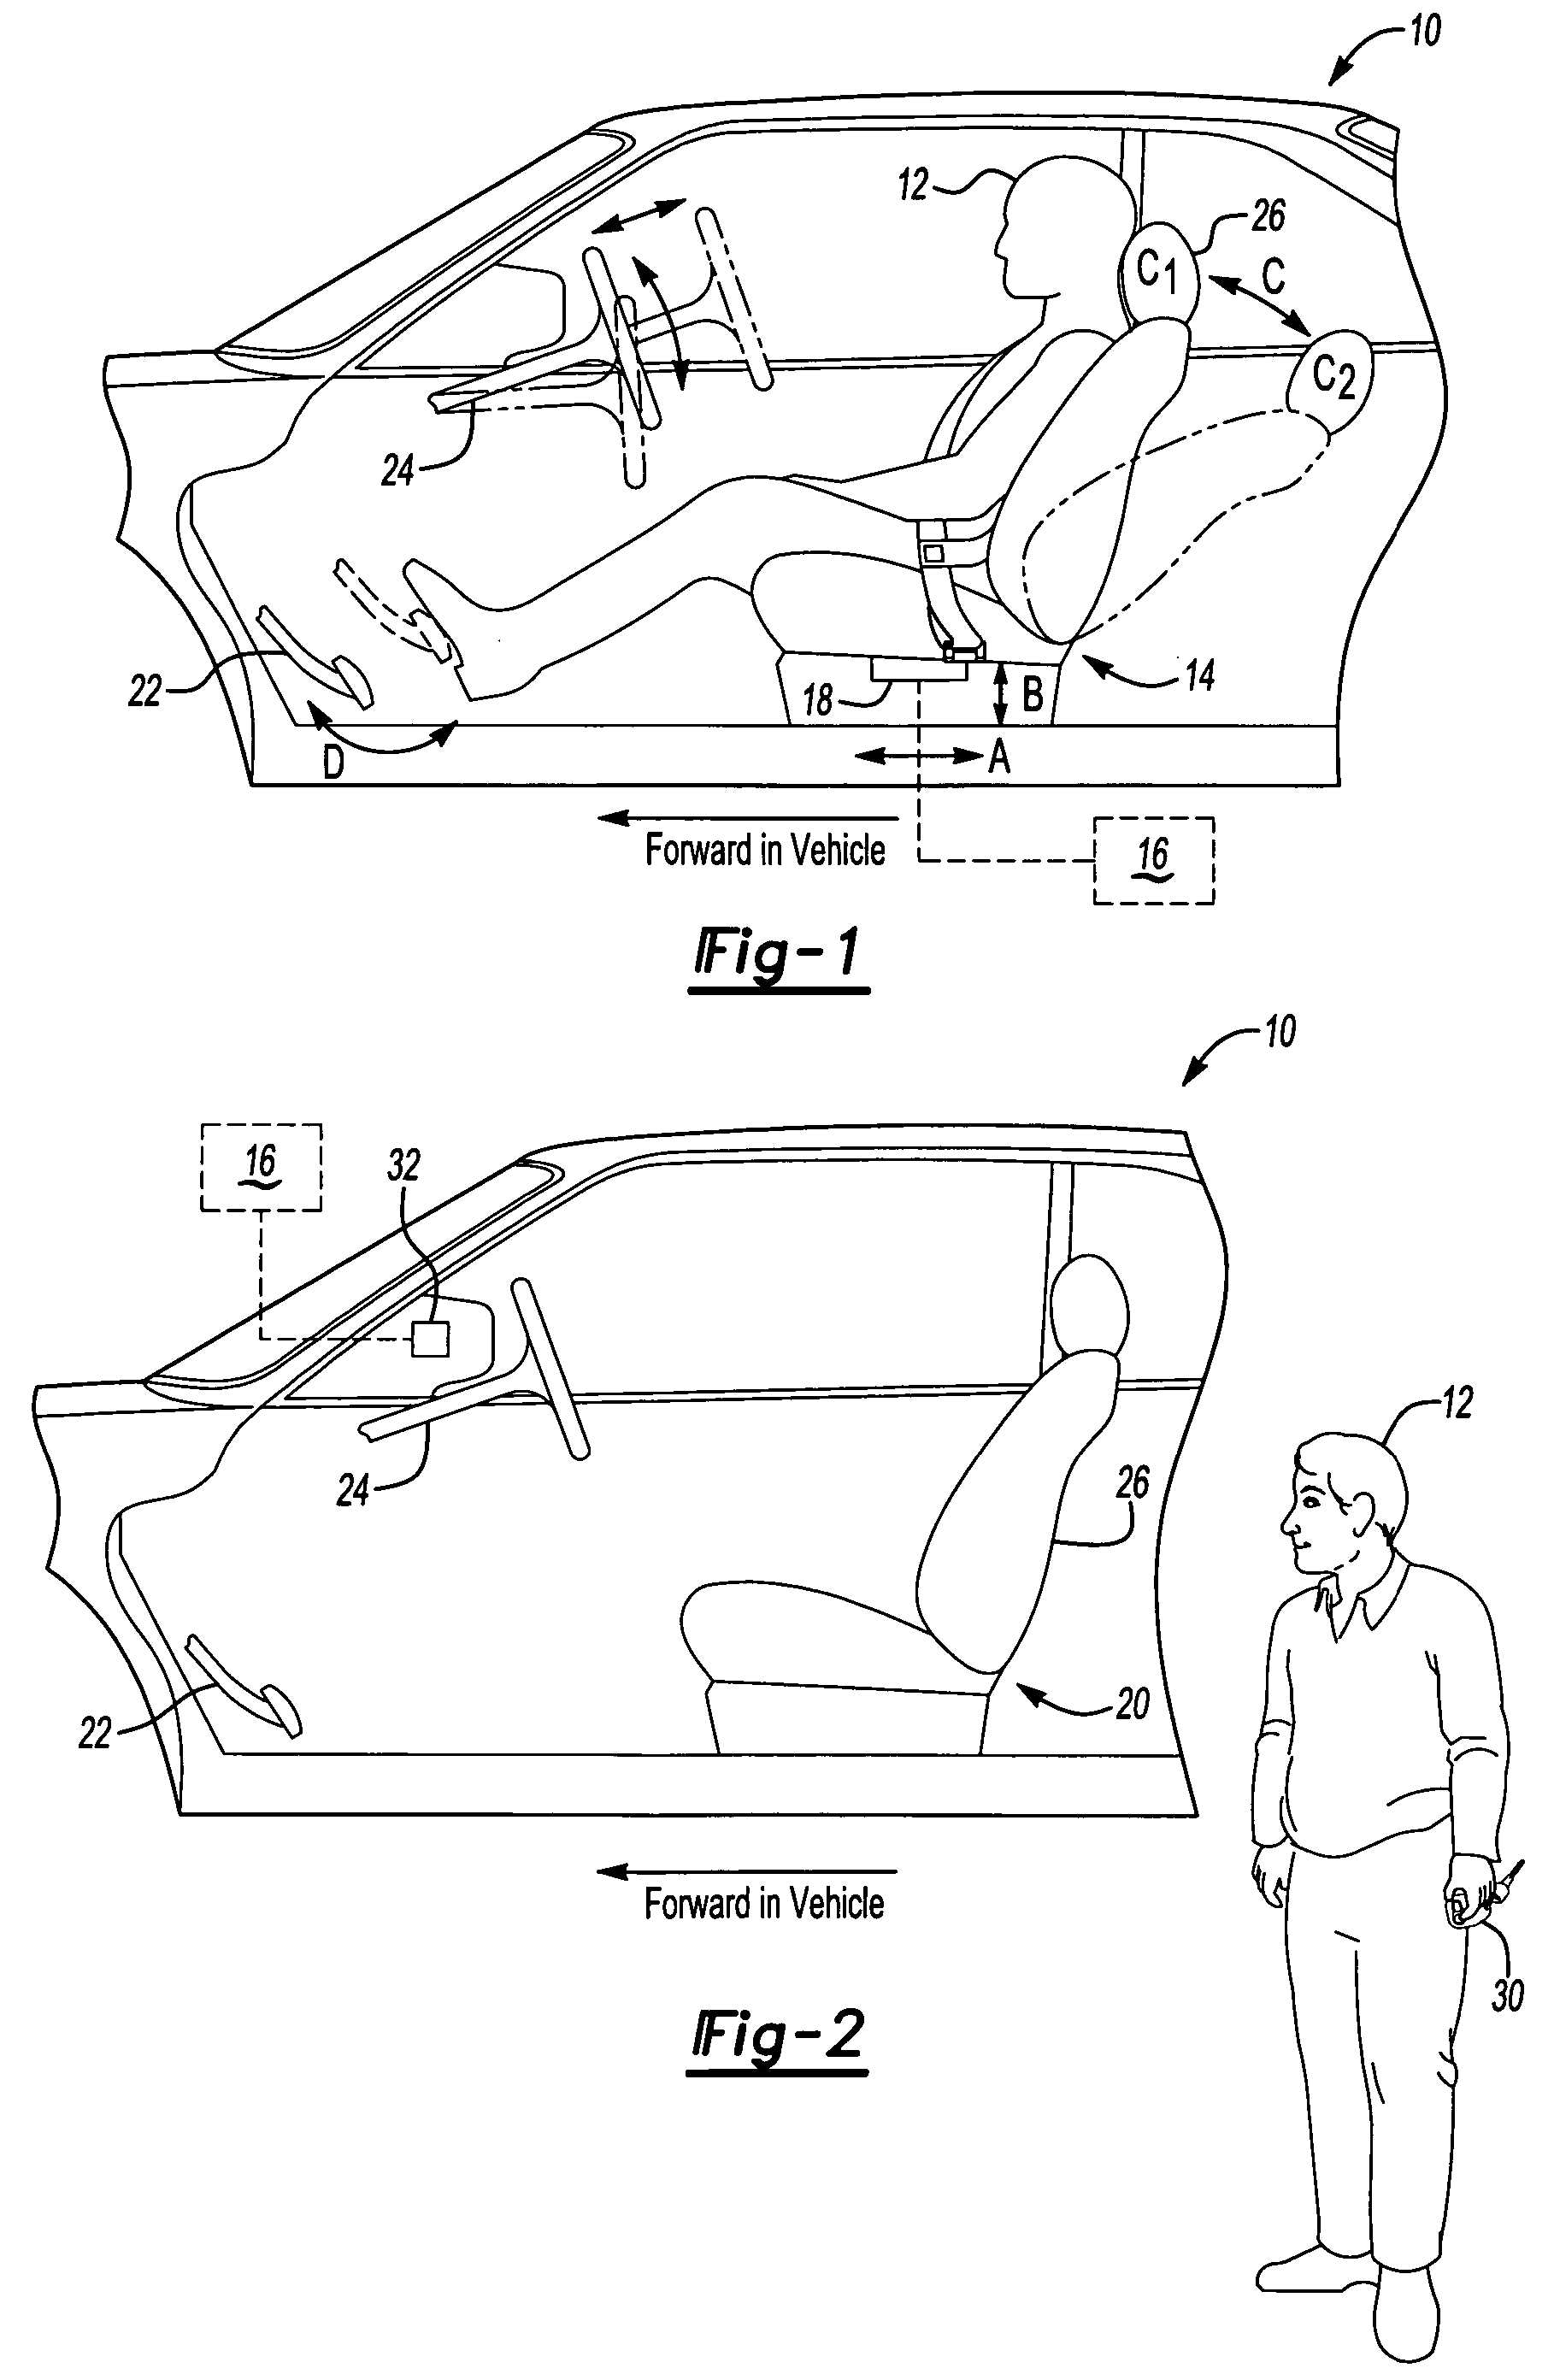 Passive control of vehicle interior features based upon occupant classification